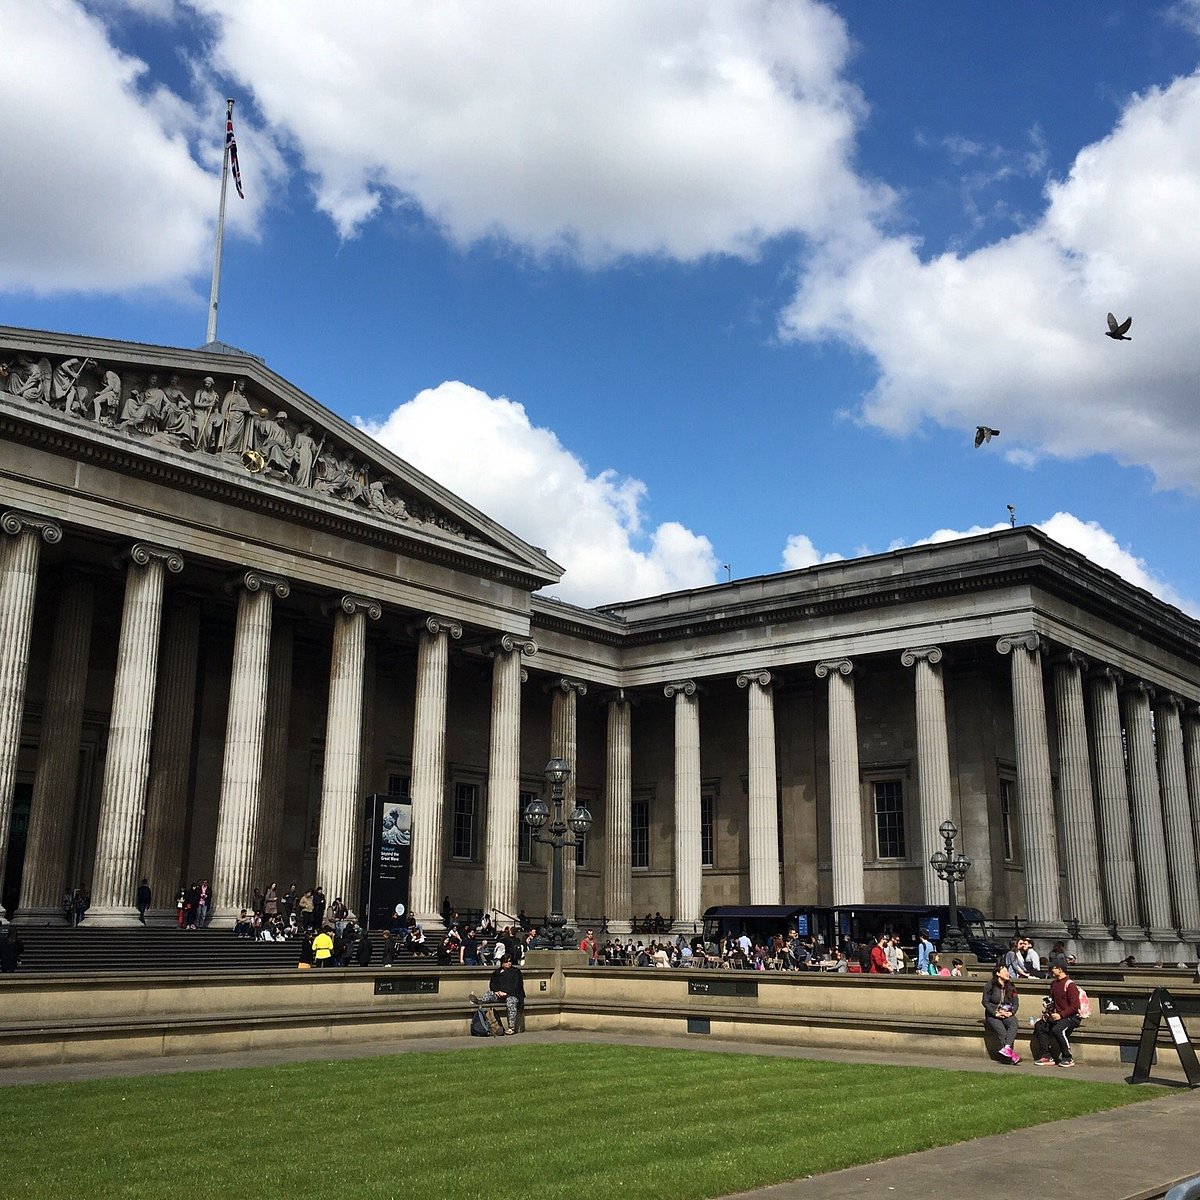 Explore the Extensive Collection at the British Museum